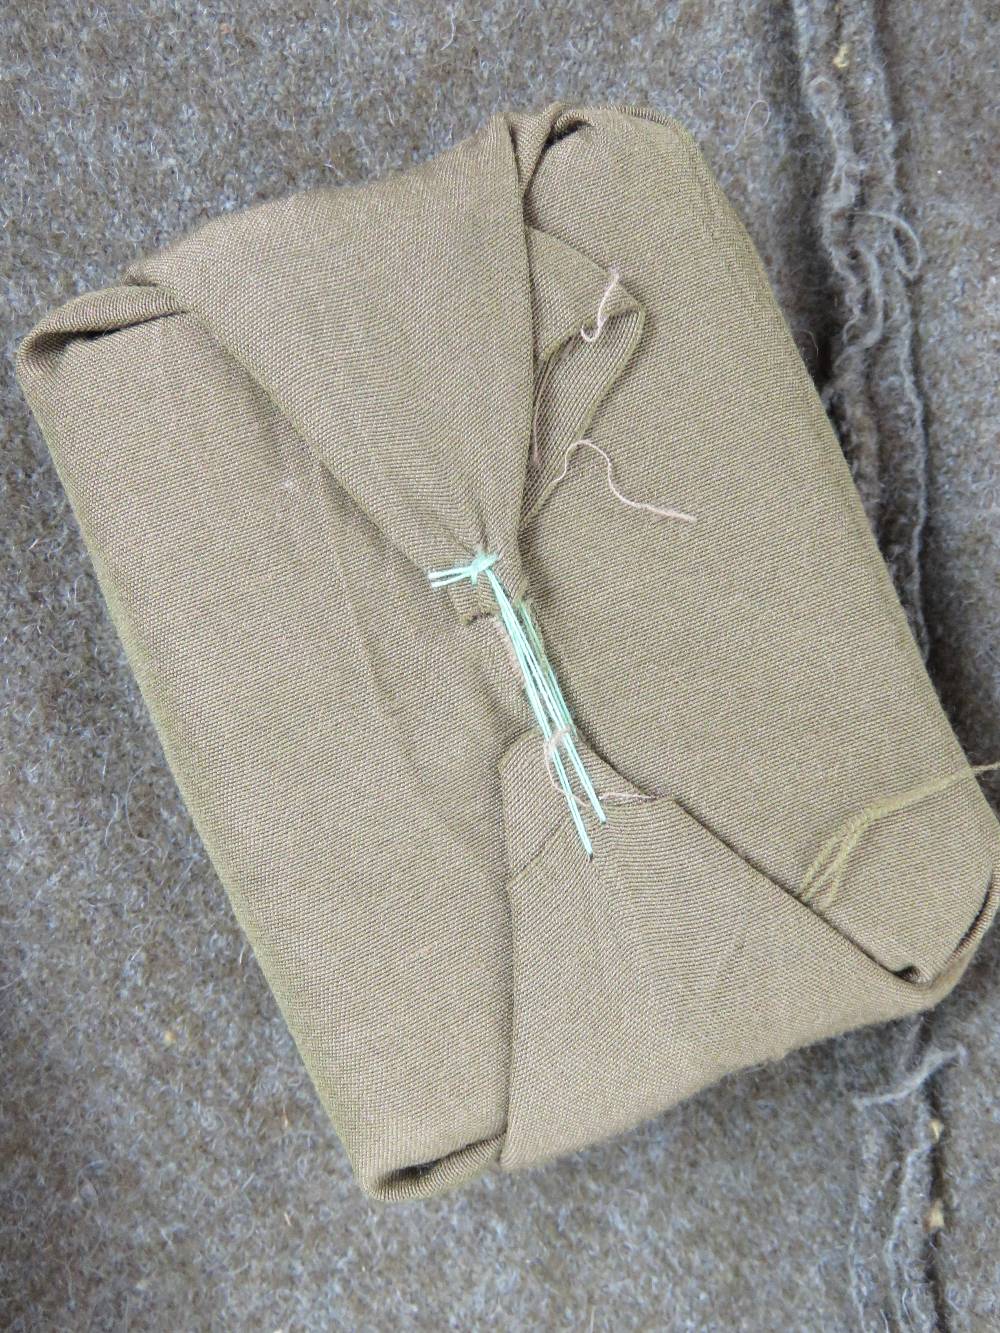 A WWII Japanese army tunic with ranking insignia upon, having packet within inside pocket. - Image 6 of 8